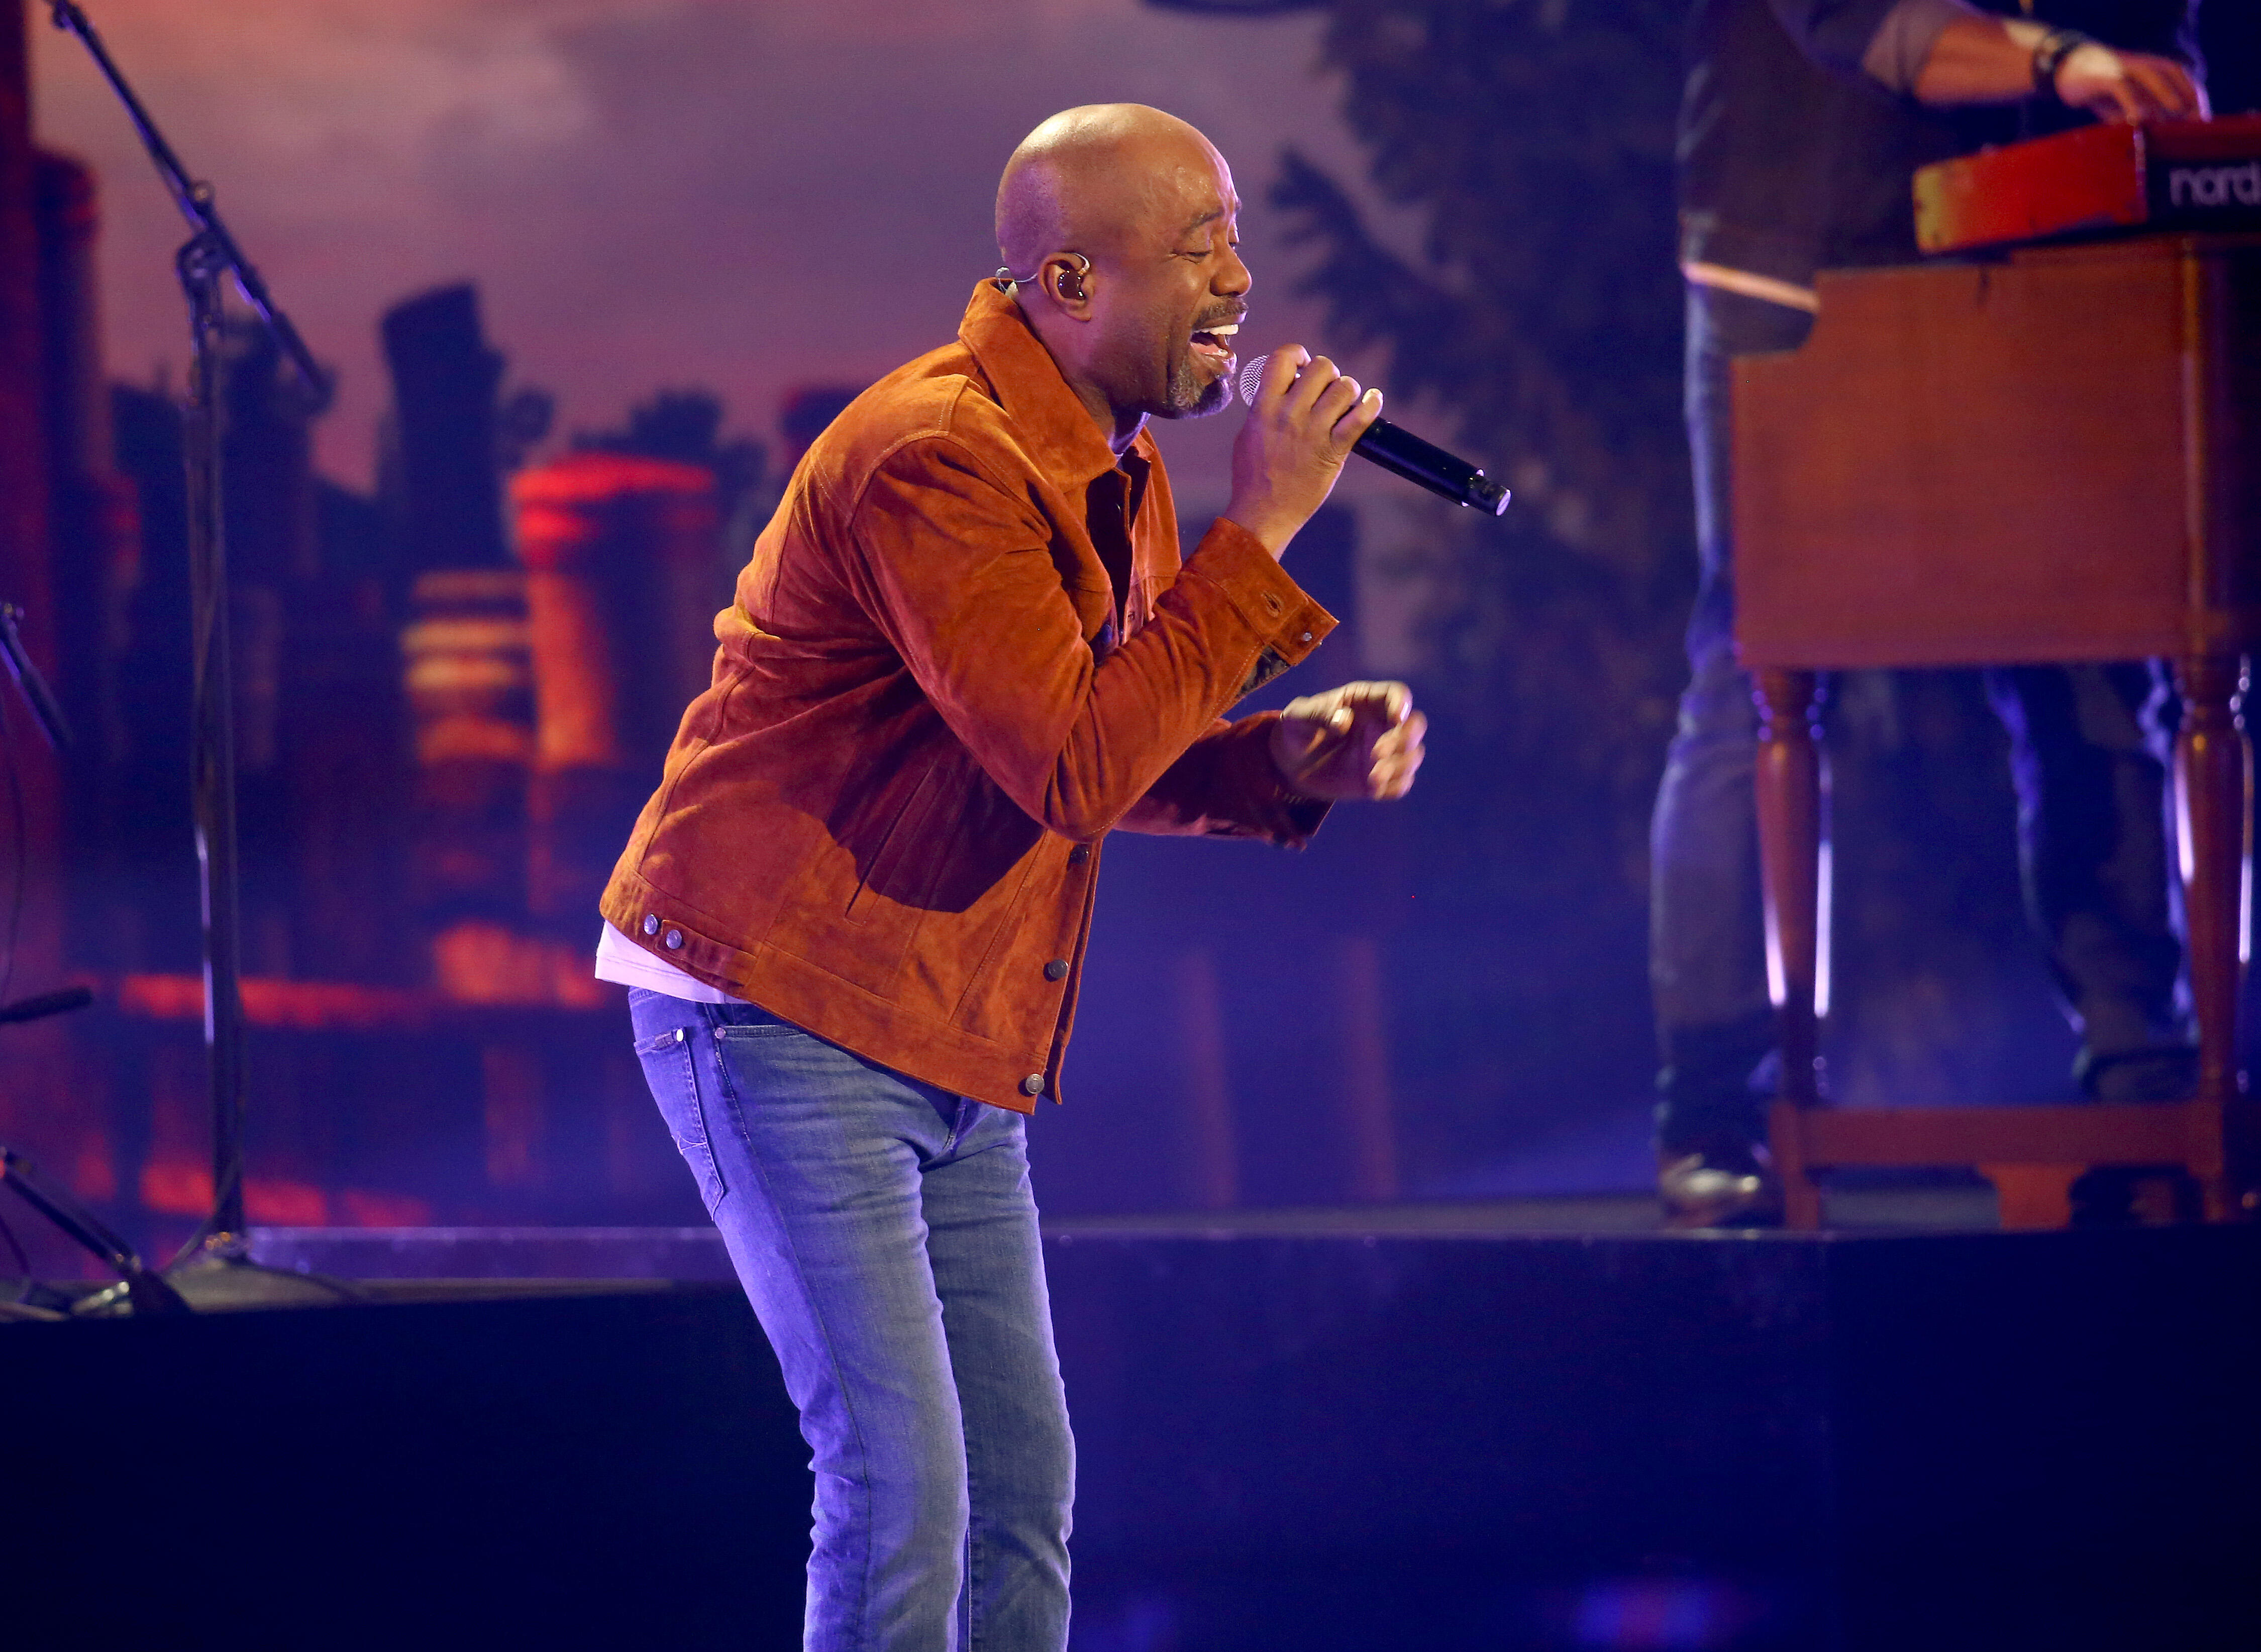 Darius Rucker Performs Solo At 2020 CMA Awards After Lady A Drops Out